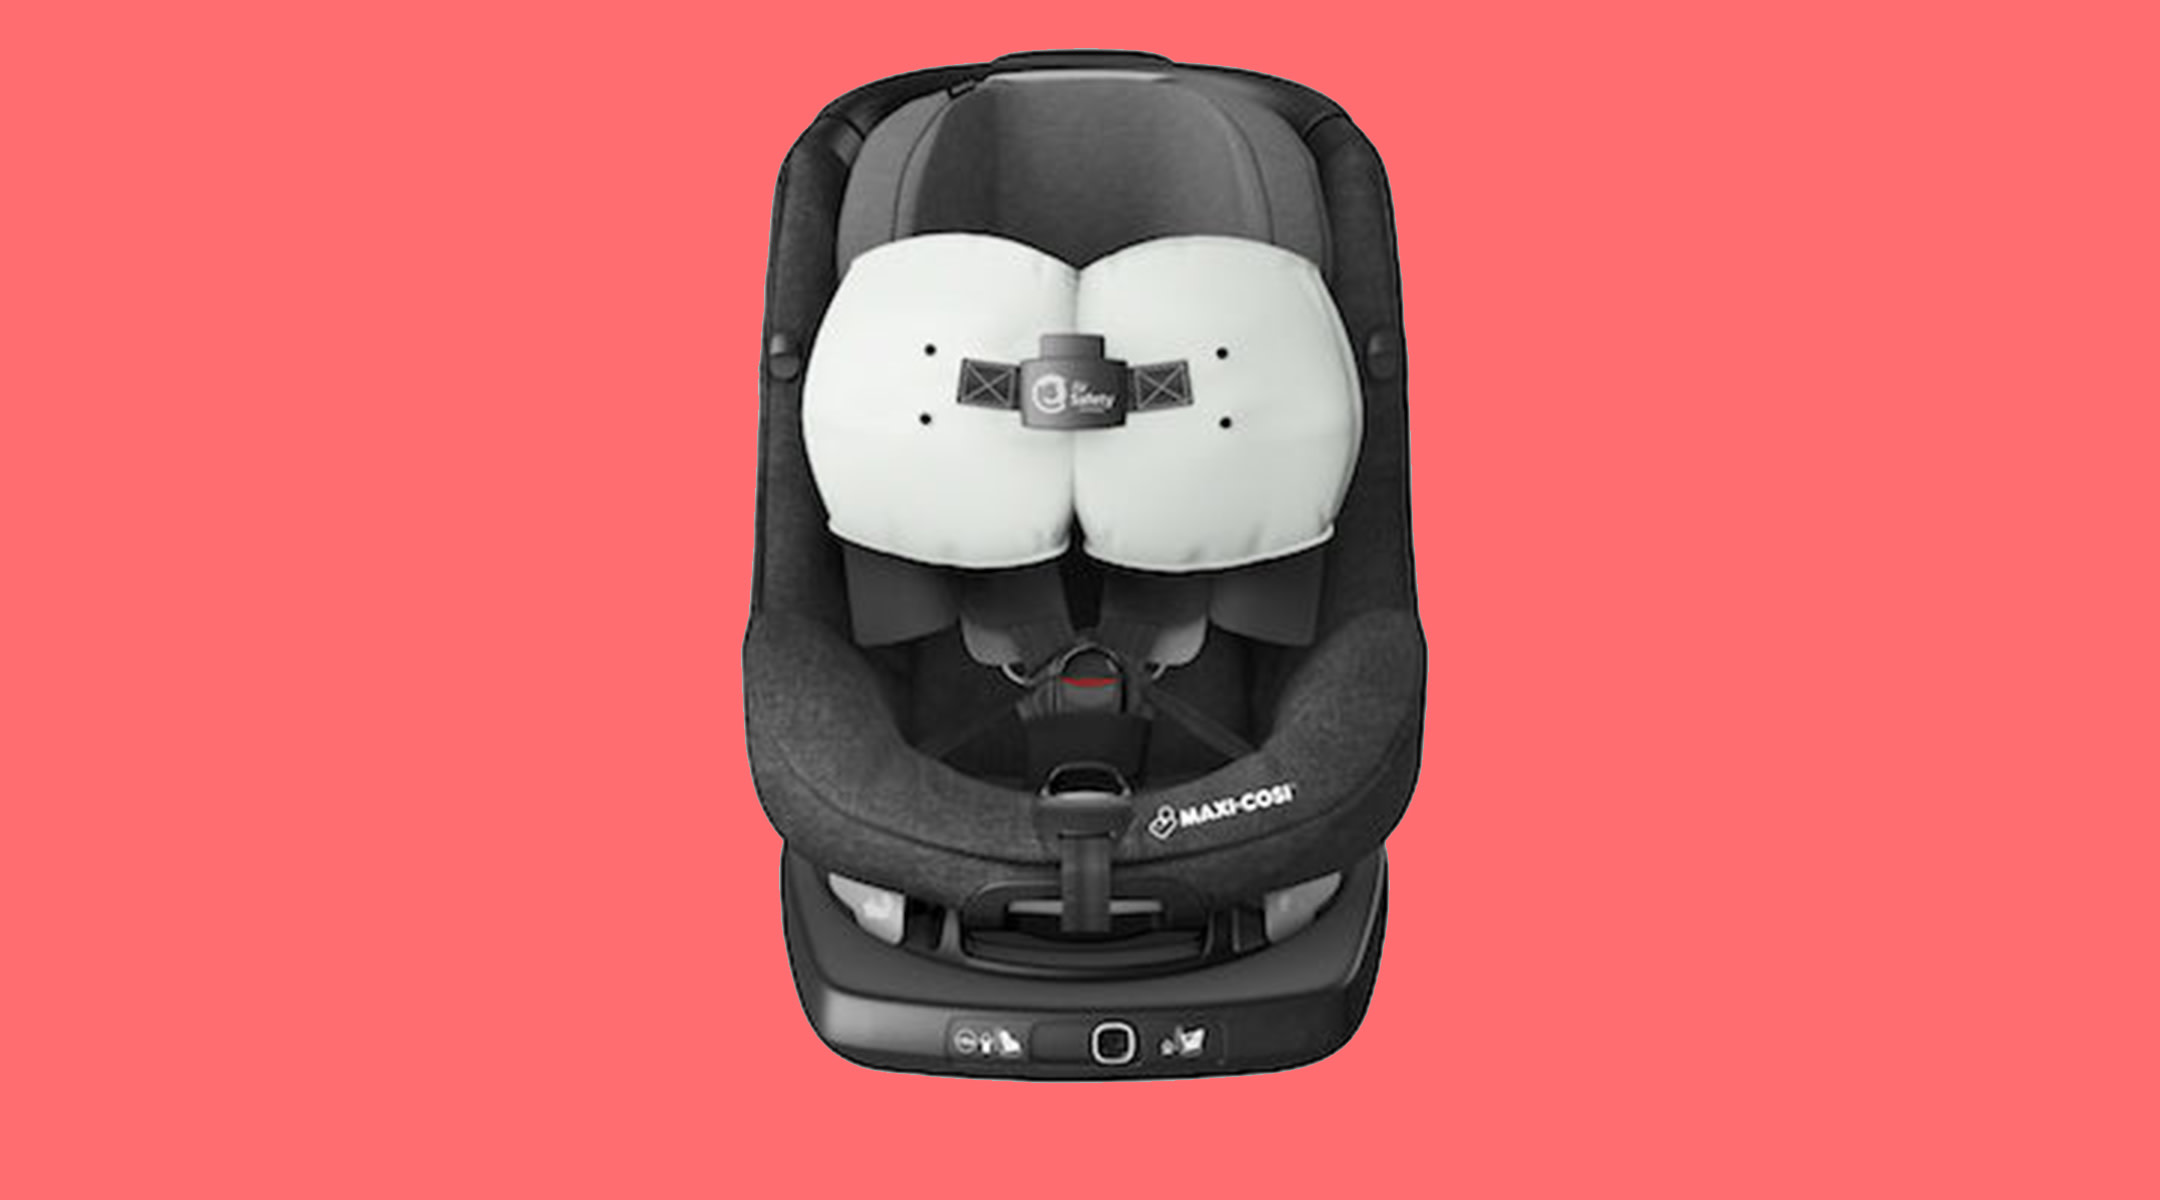 Maxi-Cosi Makes First Car With Built-In Airbags